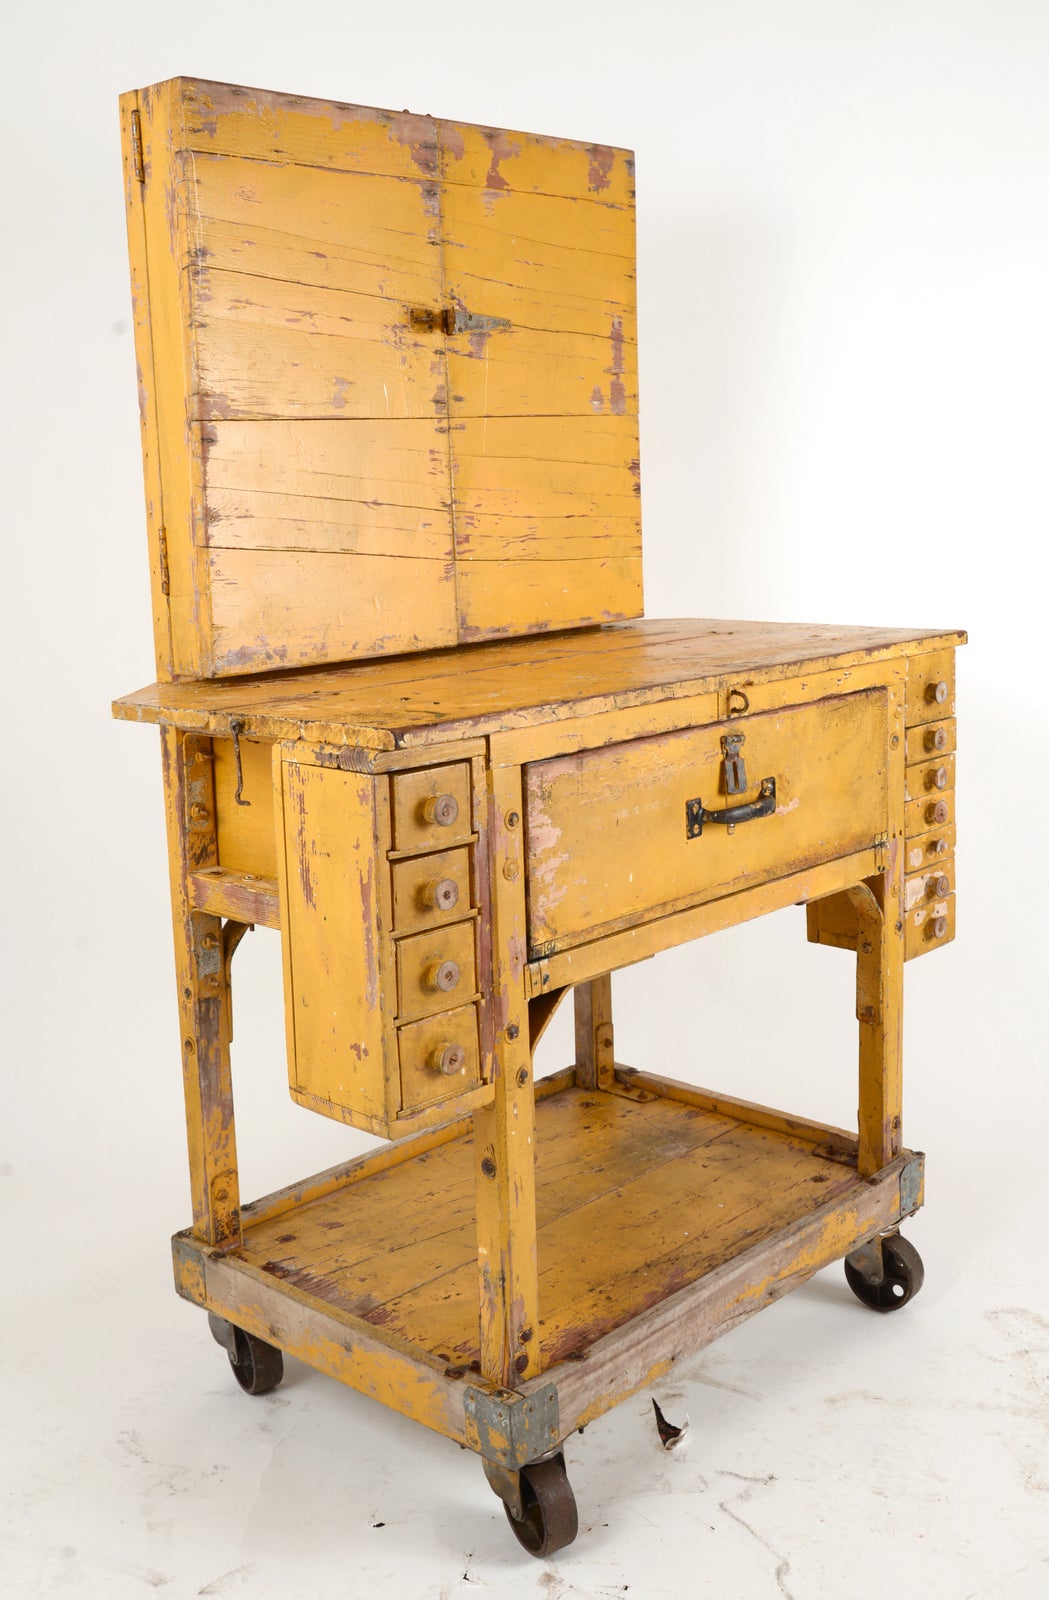 This was a one of a kind work station that came from the commercial division of John Deere and was probably made the man or woman worked on it. Complete with found object boxes as drawers and threat spools for knobs this piece celebrates dedication